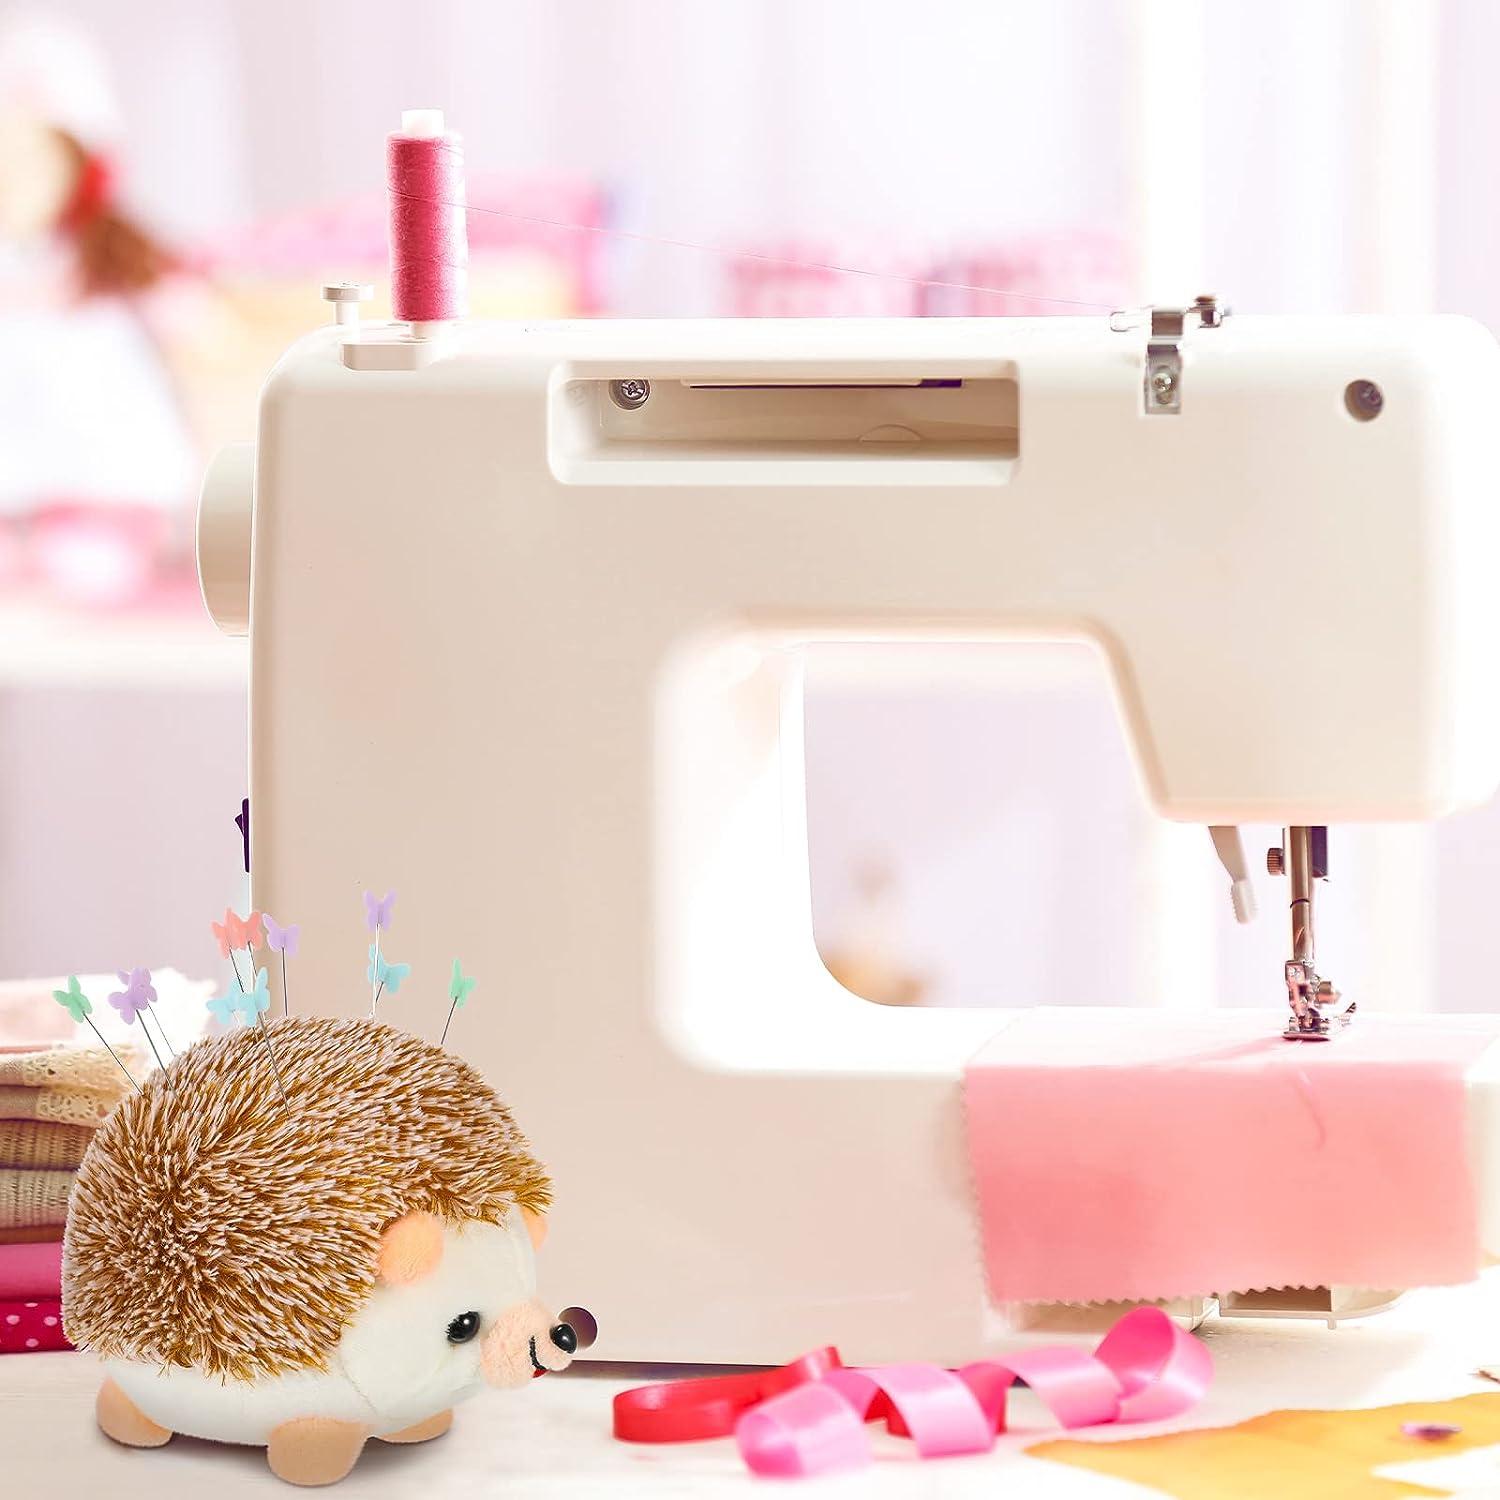 Pin Cushion, Cute Hedgehog Shape Pin Cushion Sewing Needle Cushions Holder Sewing Accessory for Sewing DIY Crafts, Size: 2.8 x 4.1 x 2.6